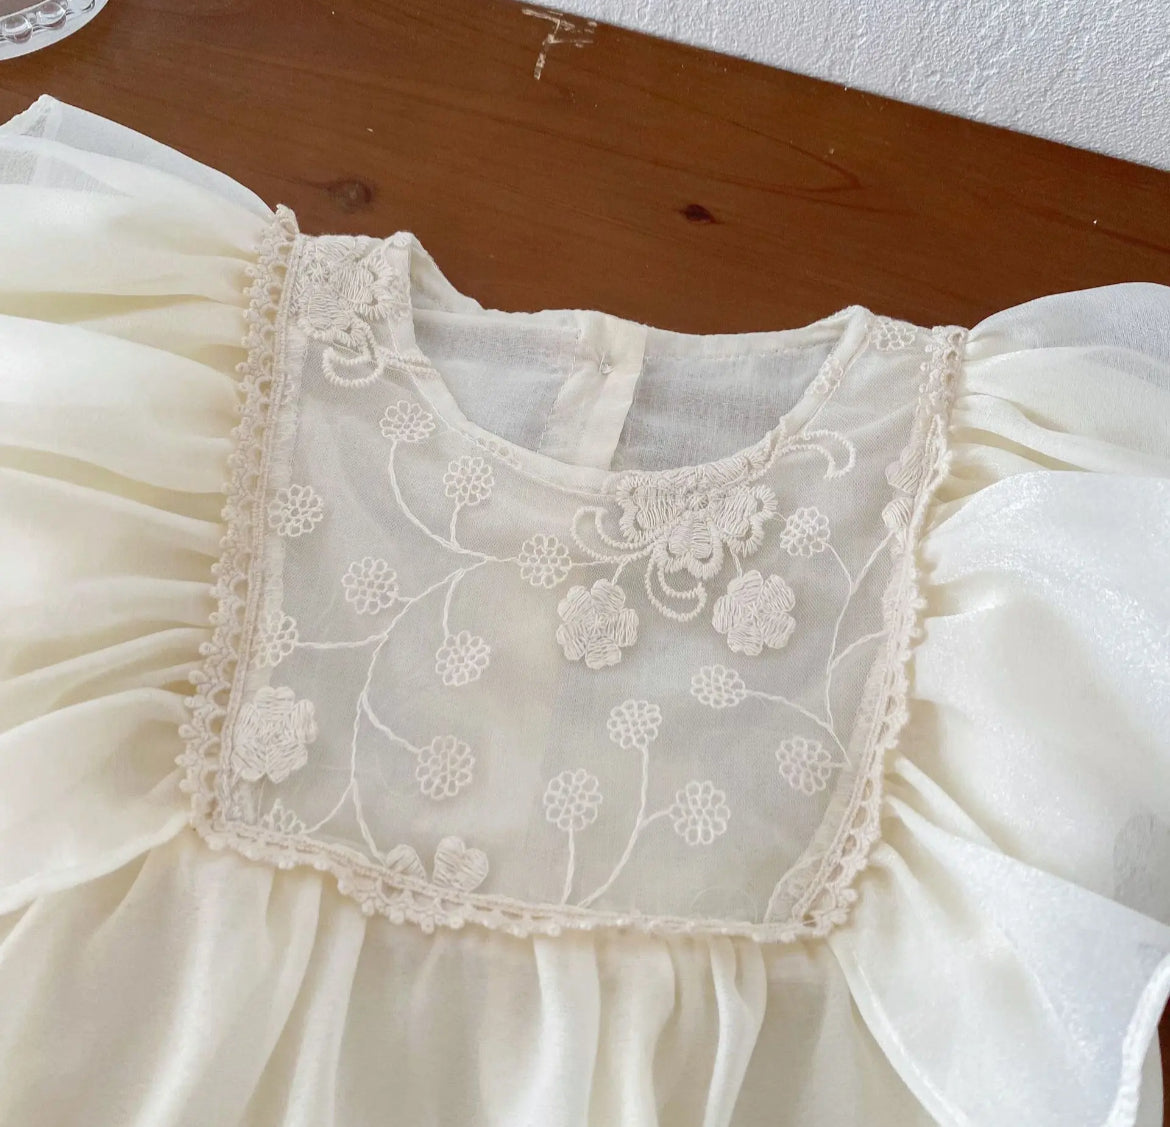 Baby Girls Romper - Ivory Ruffle with Lace Embroidered Bodice - showing the lace embroidered detailing